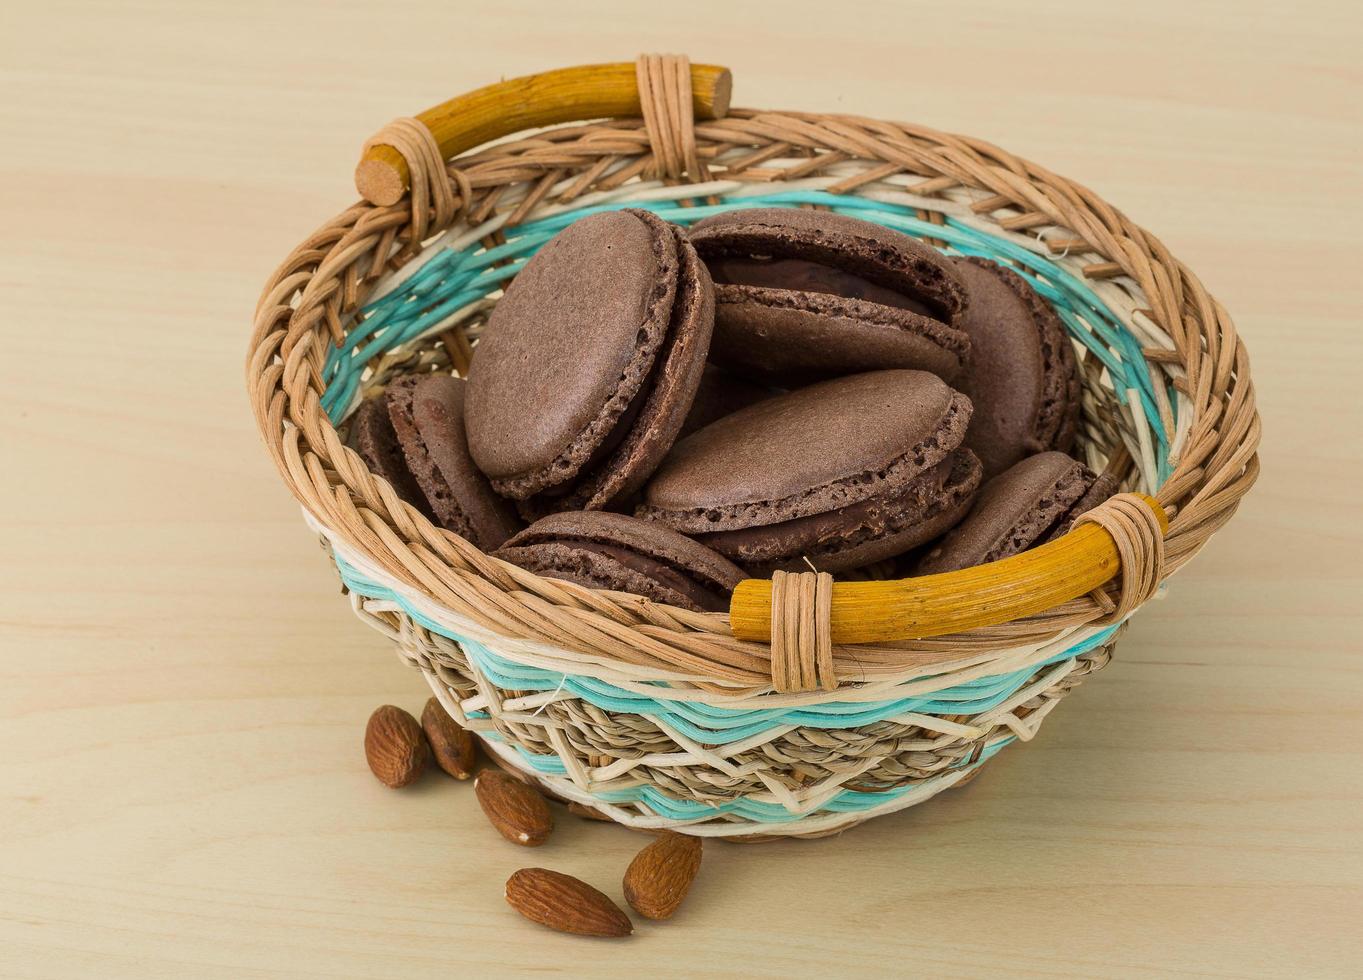 Chocolate macaroons in a basket on wooden background photo